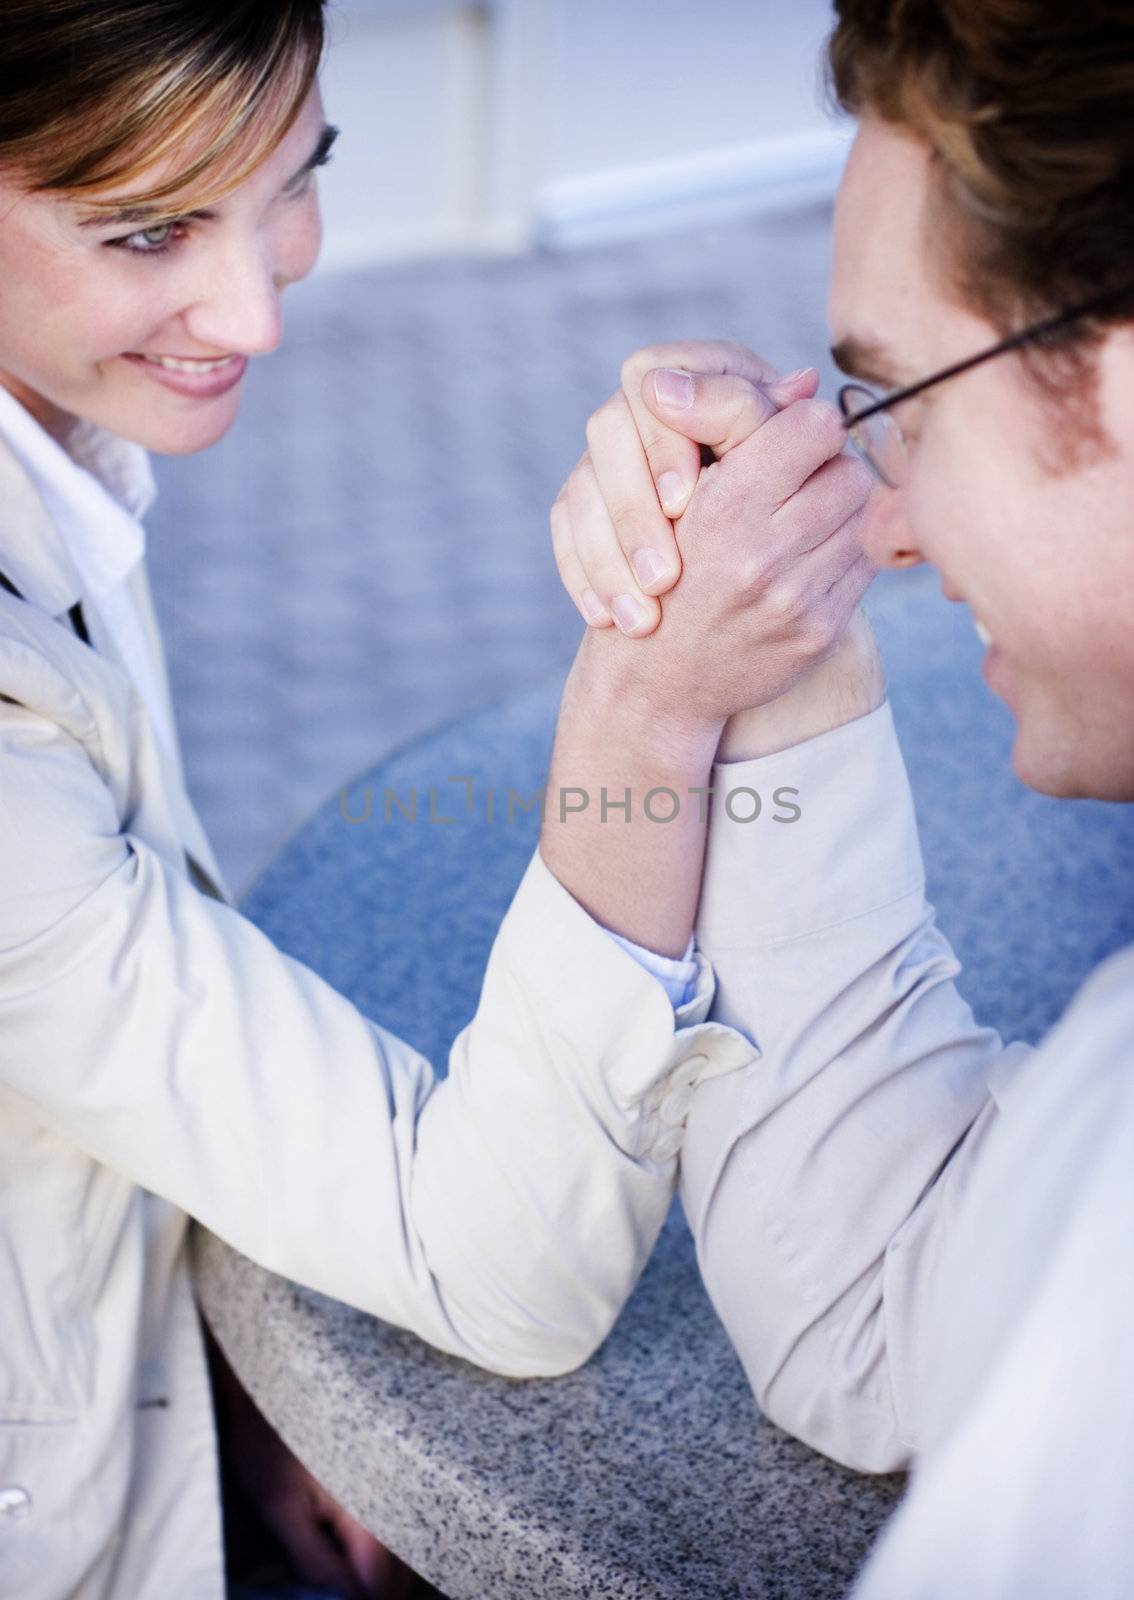 close view of man and woman sitting looking at each other and arm wrestling